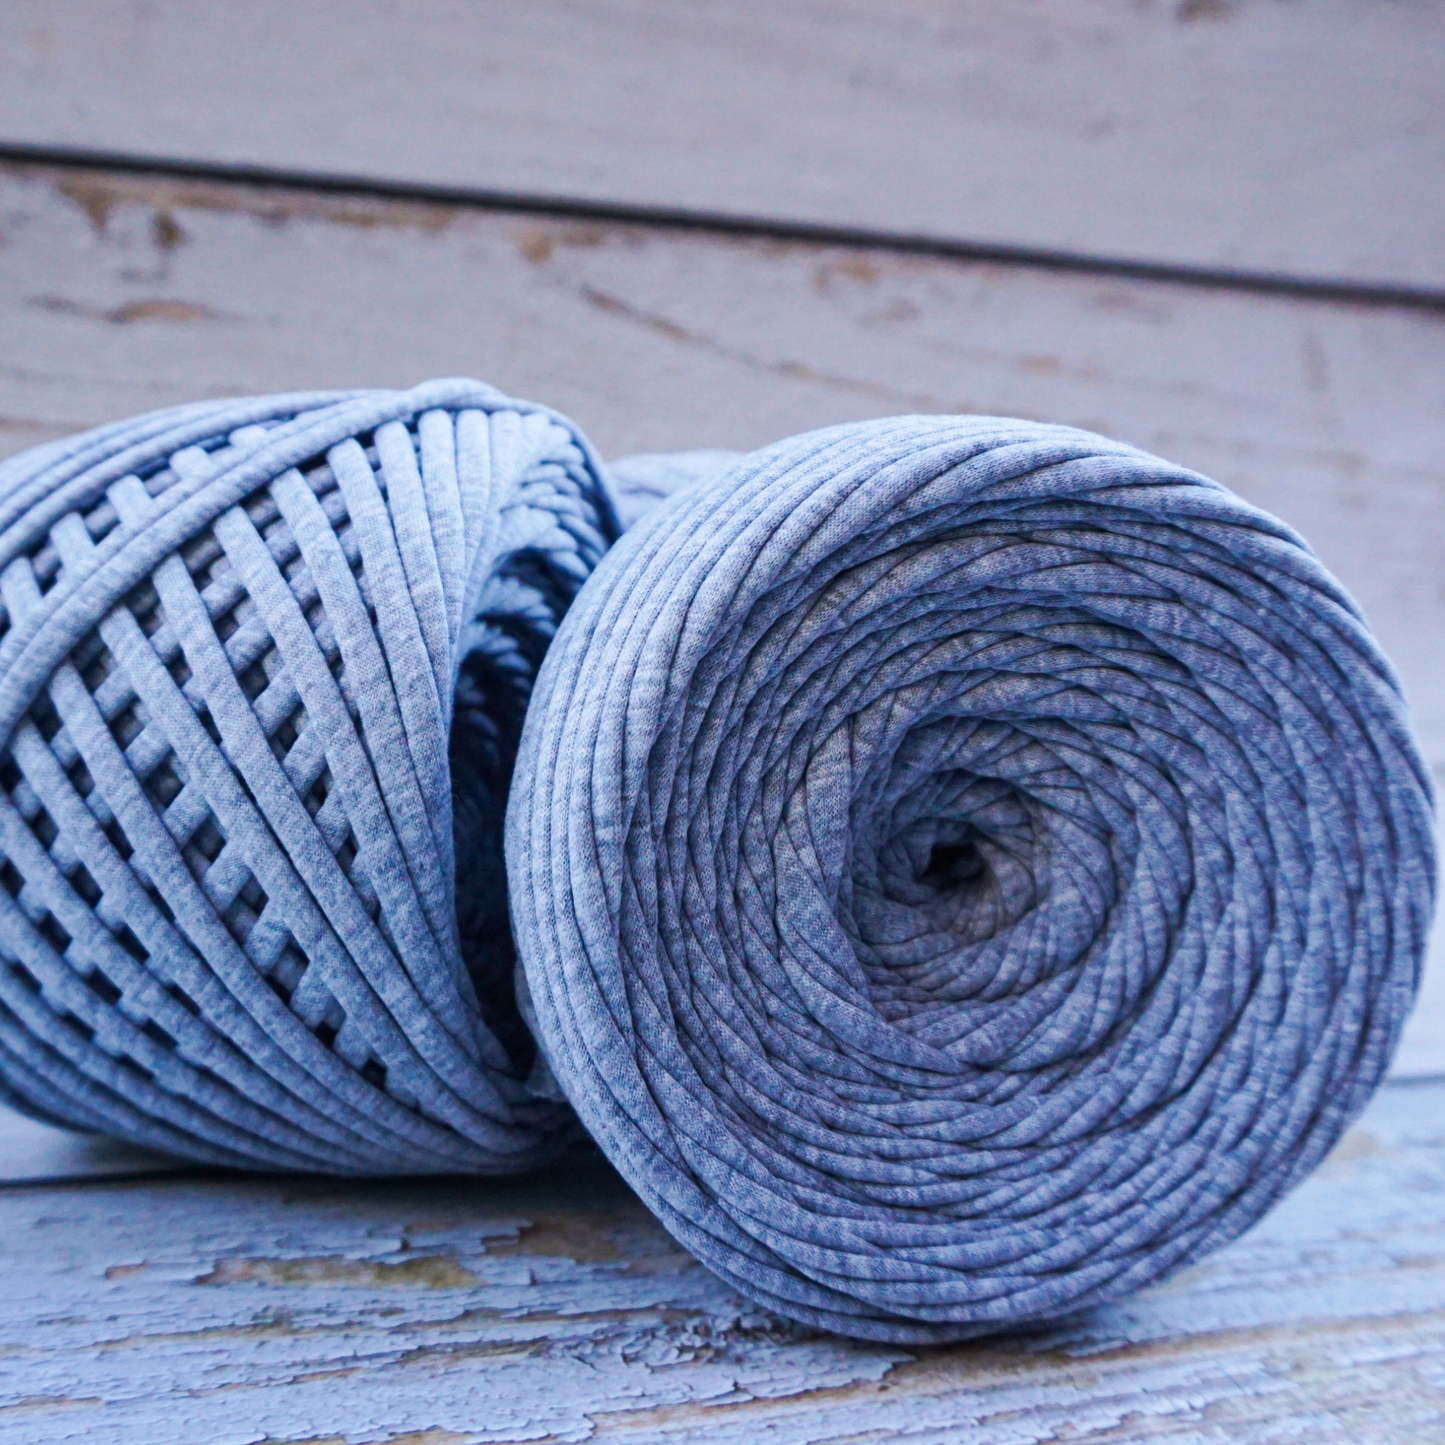 T-shirt yarn for crocheting baskets, bags, rugs and home decor. Jersey grey